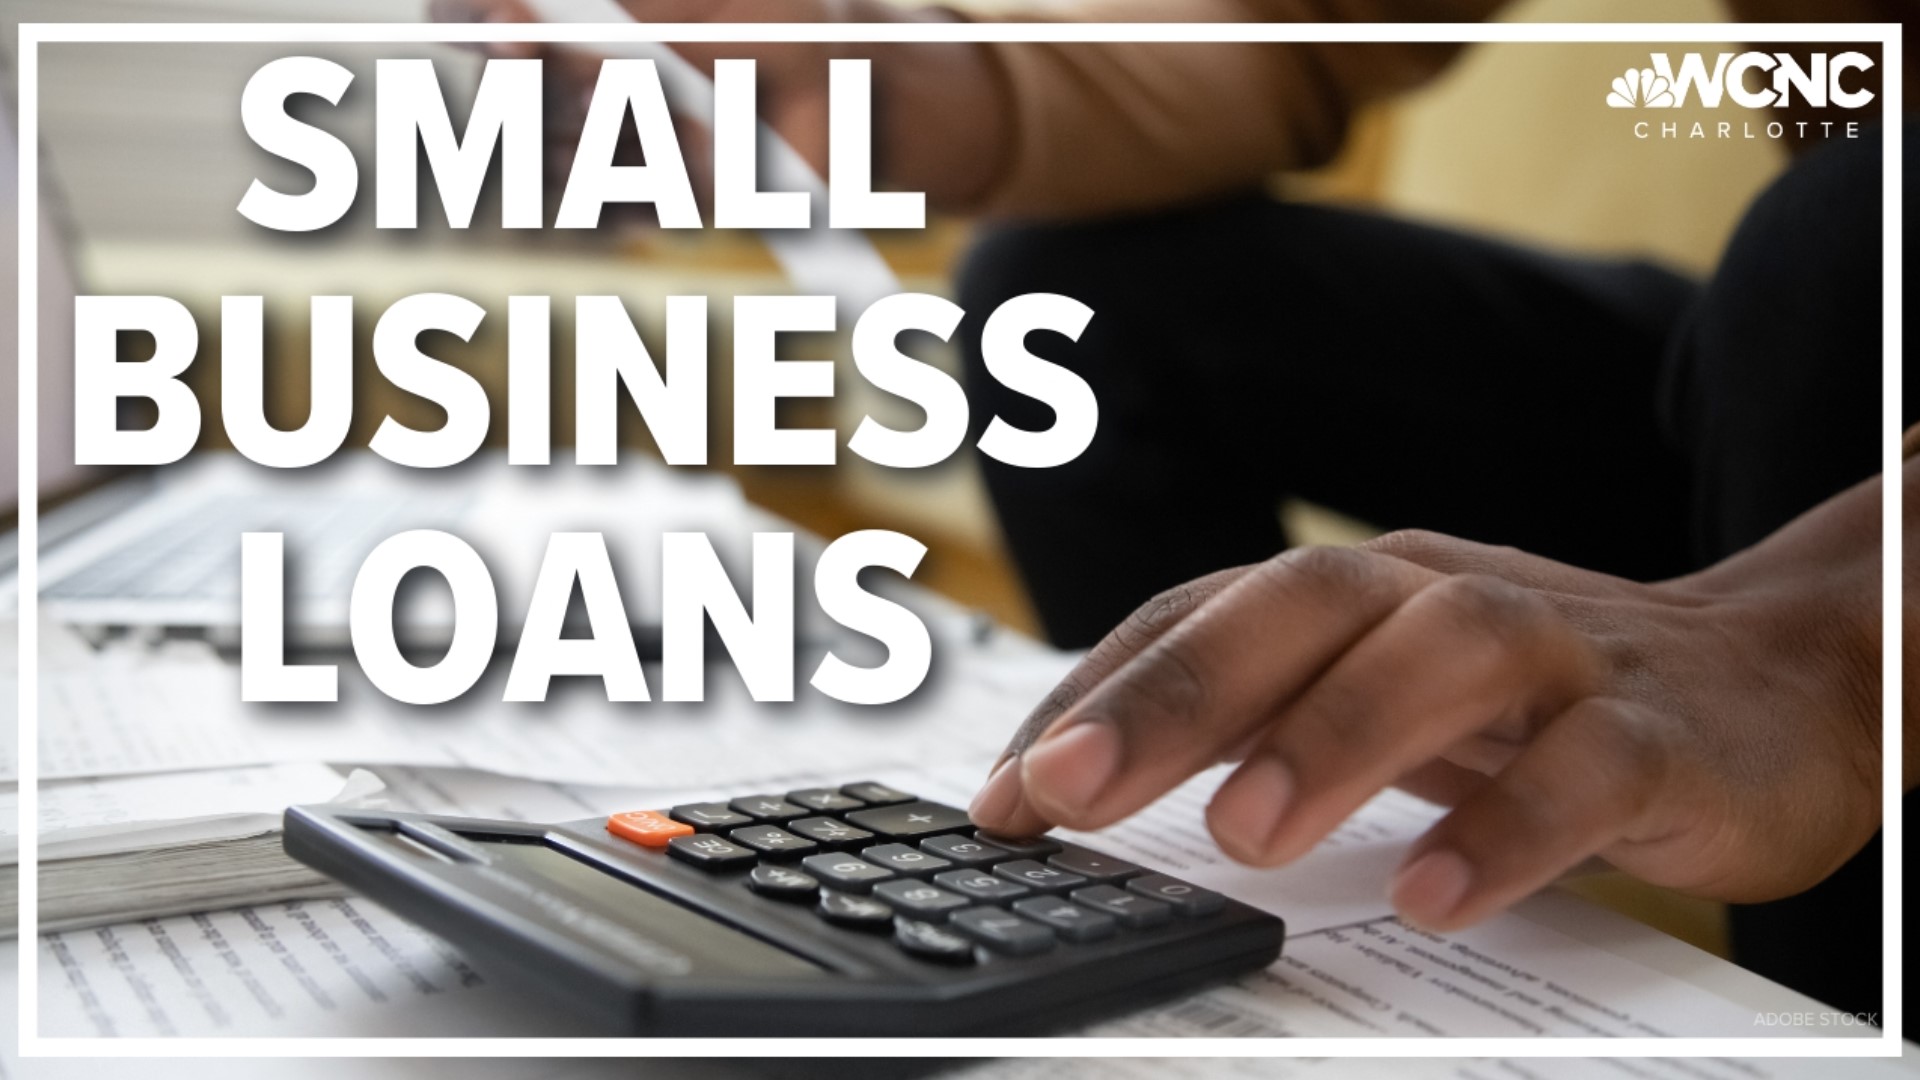 Charlotte is seeing a surge in small businesses It can be an exciting time for business owners, but a stressful time if they're not careful when applying for loans.